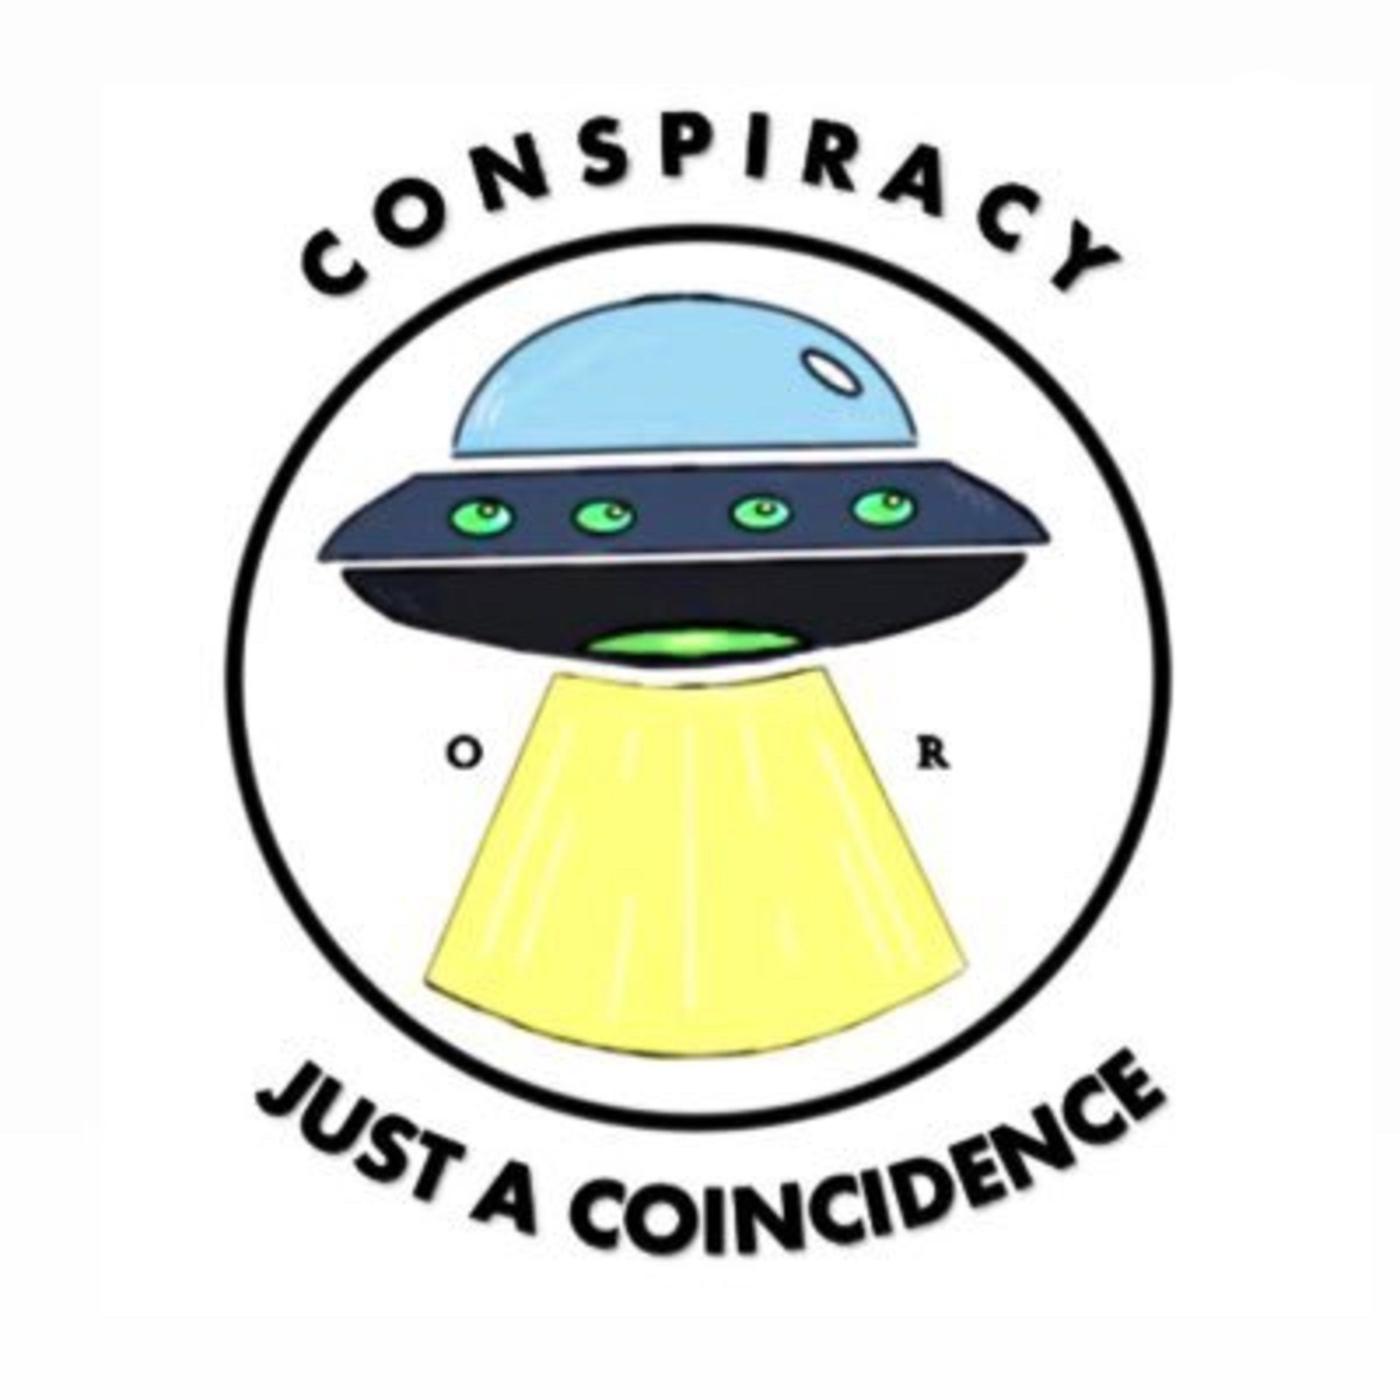 Who Really Pulls The Strings? Johnny Cirucci on Conspiracy or Just a Coincidence? with Jack Allen